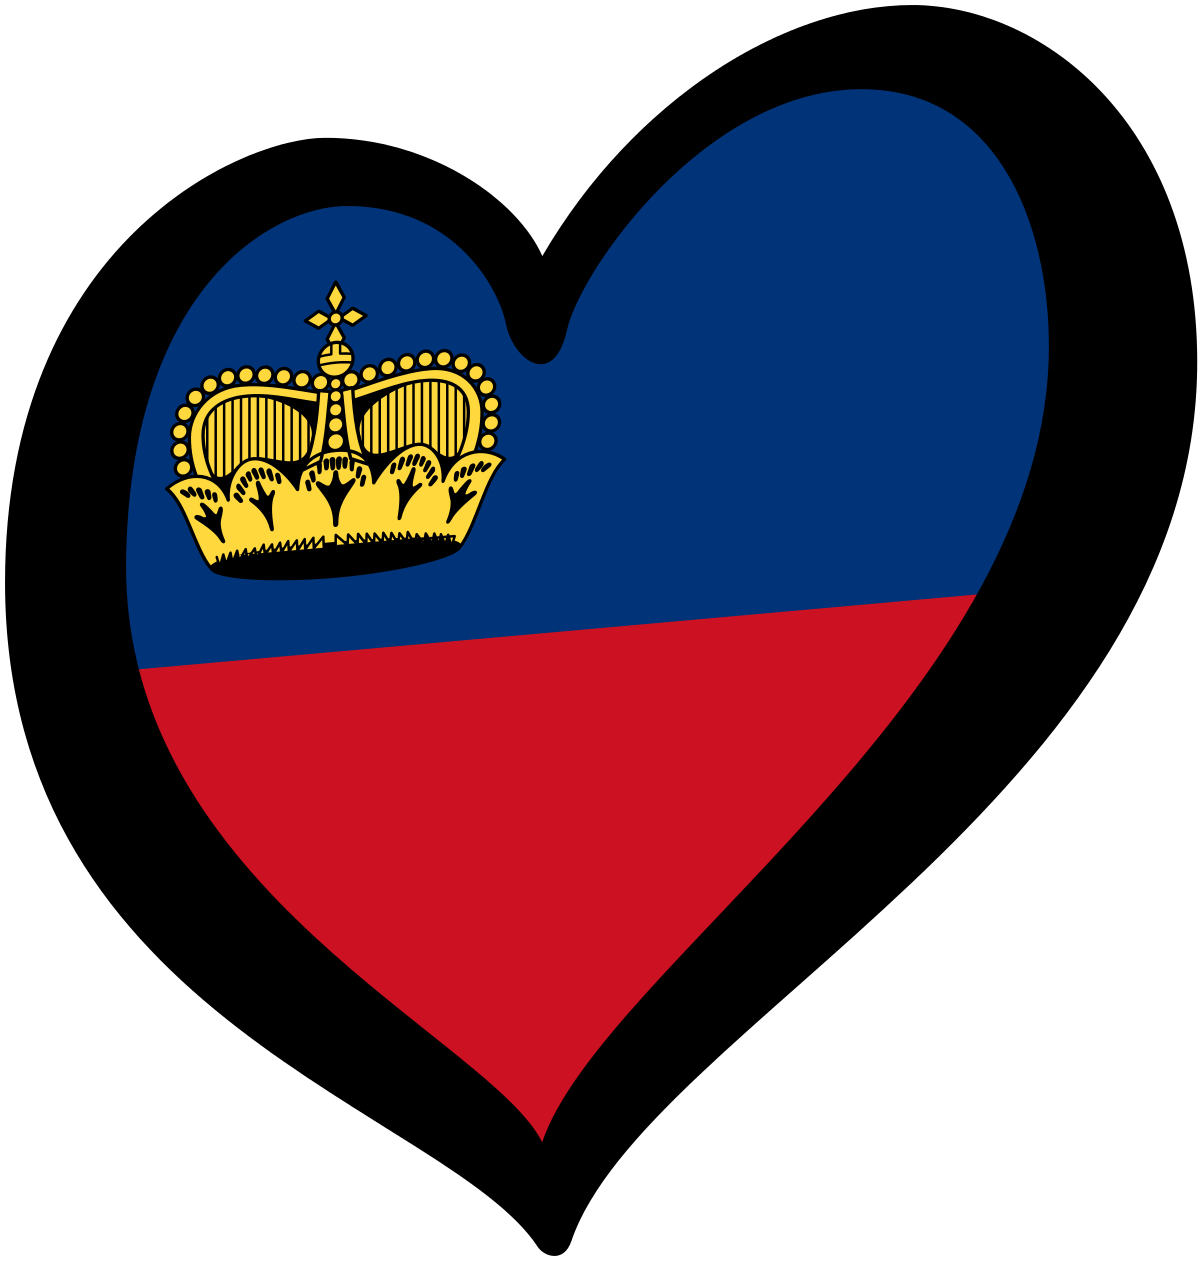 A Heart Shaped Flag With A Crown On It